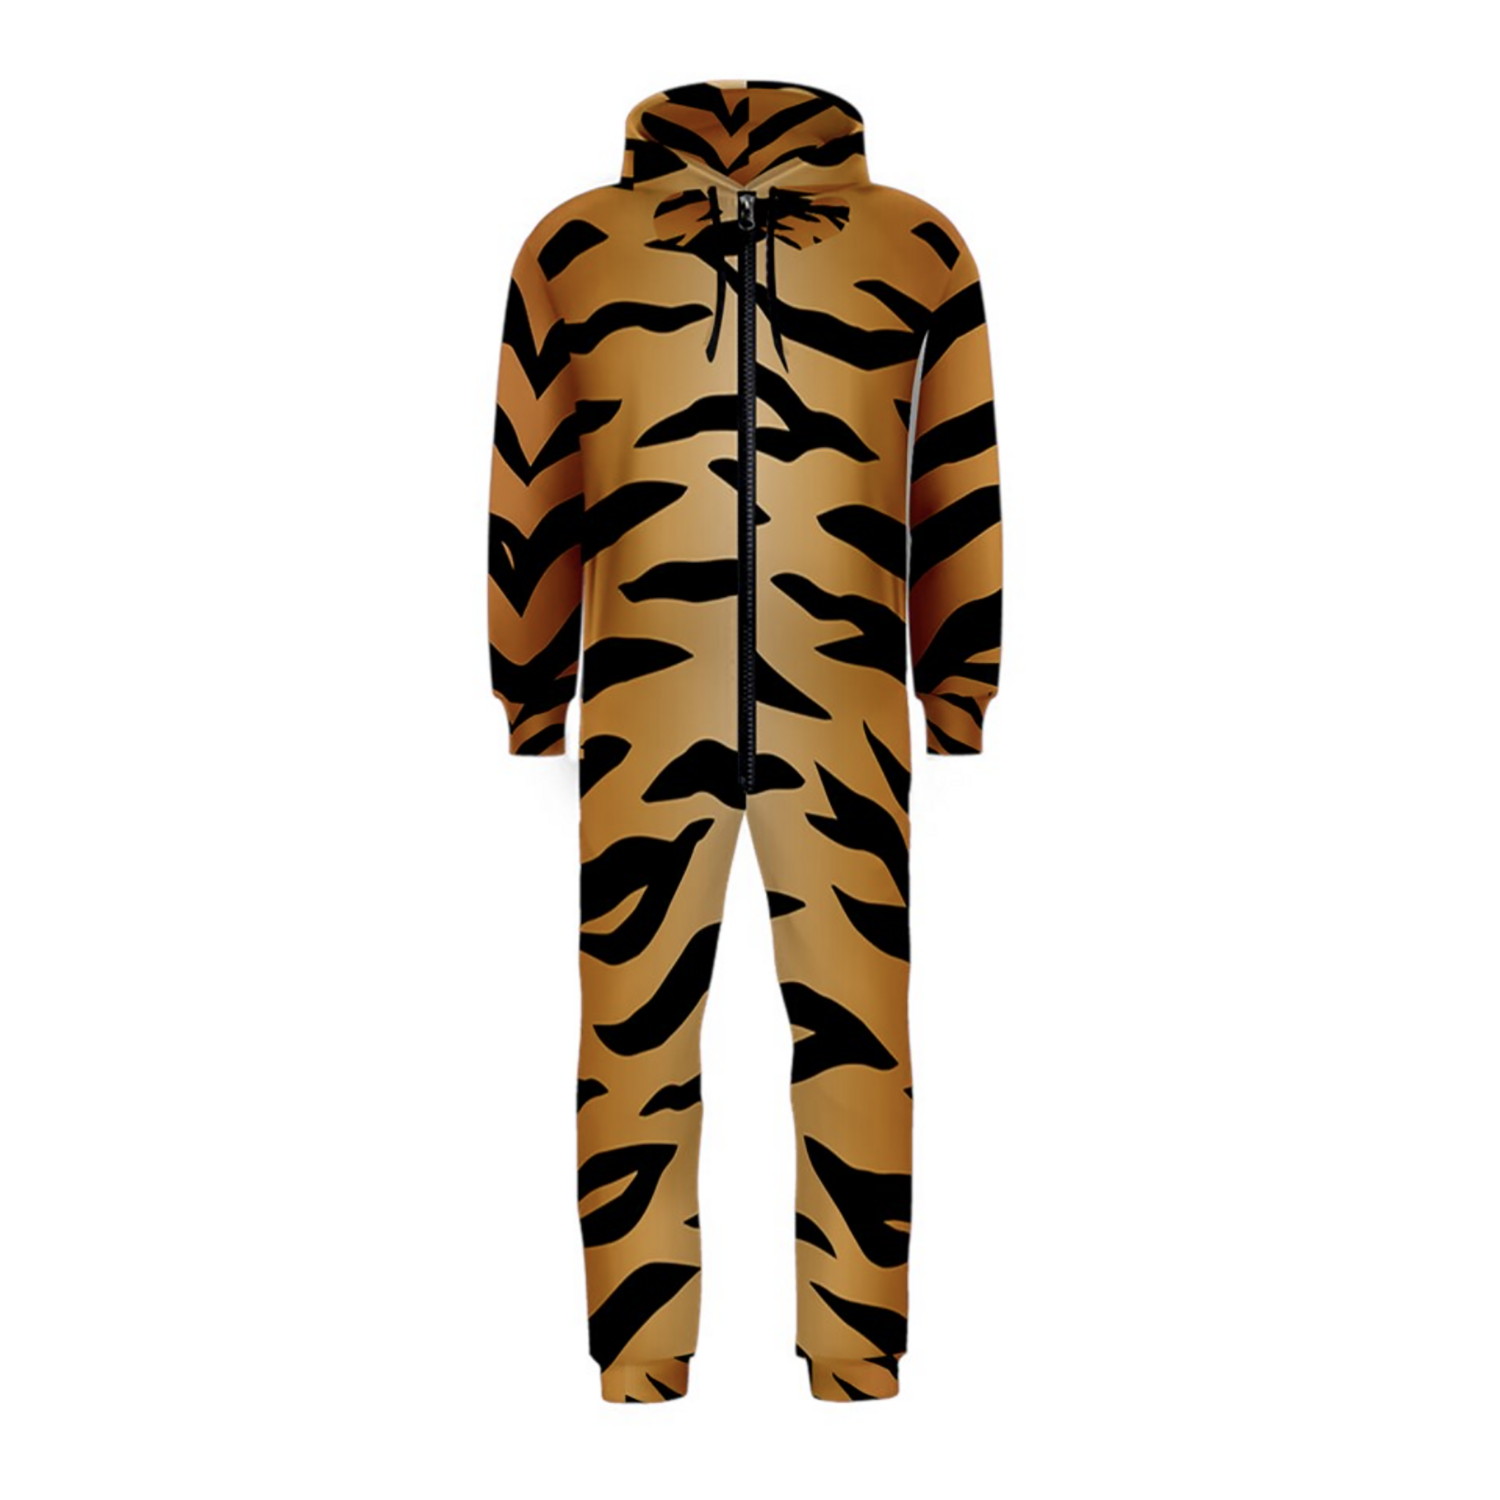 👸🏽🤴🏽🐅 Classic Tiger print, Feline print, Animal's print, Hooded Onesie Jumpsuit For Kids, 12 sizes 2 to 18, tiger, cat, feline, animal, gift, gift for kids